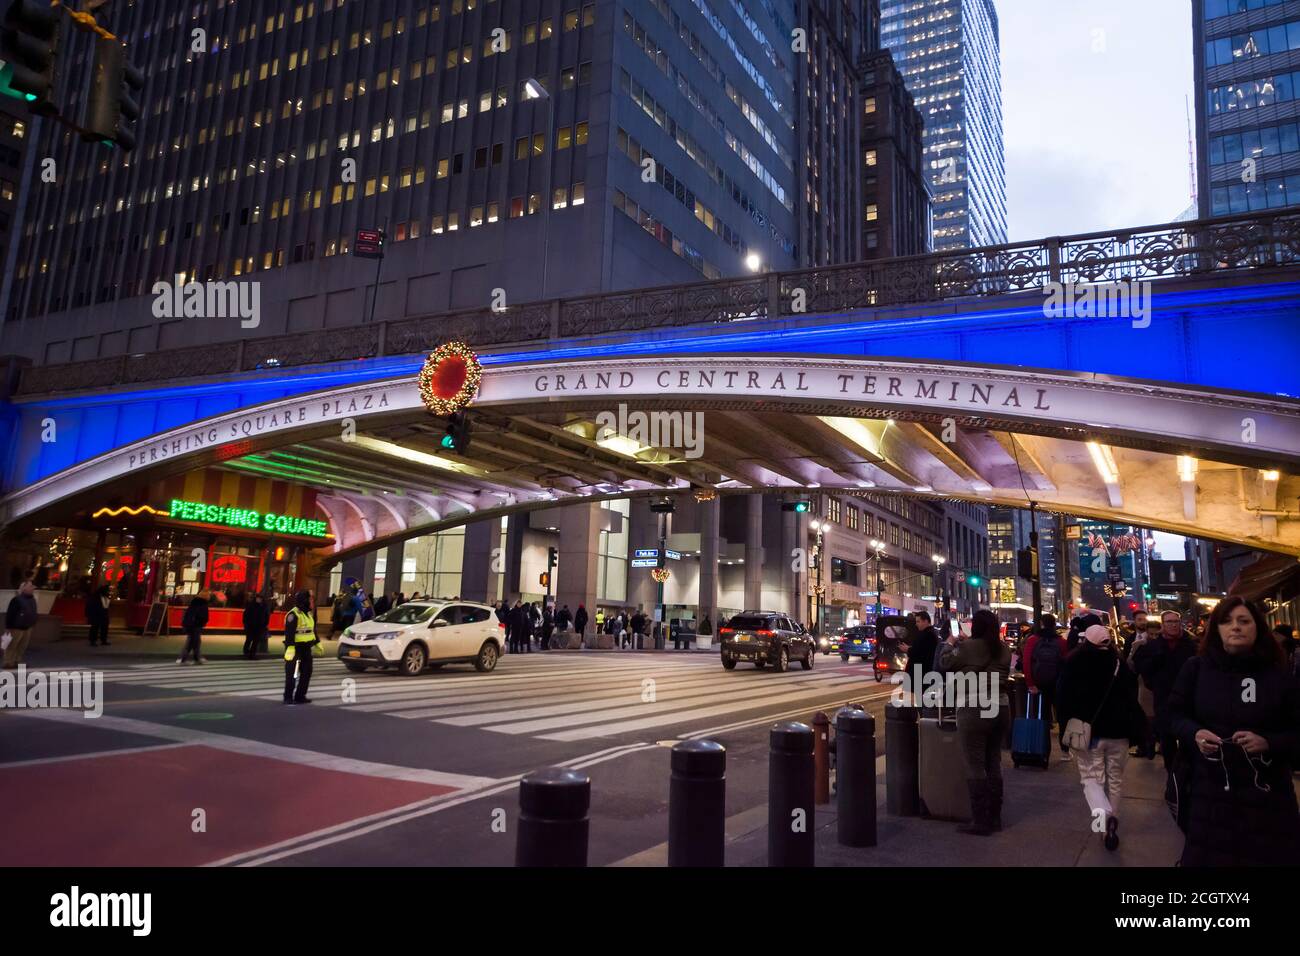 Night street view in the neighbourhood of the Pershing Square Plaza - Grand Central Terminal commuter rail terminal neighbourhood in Midtown Manhattan Stock Photo